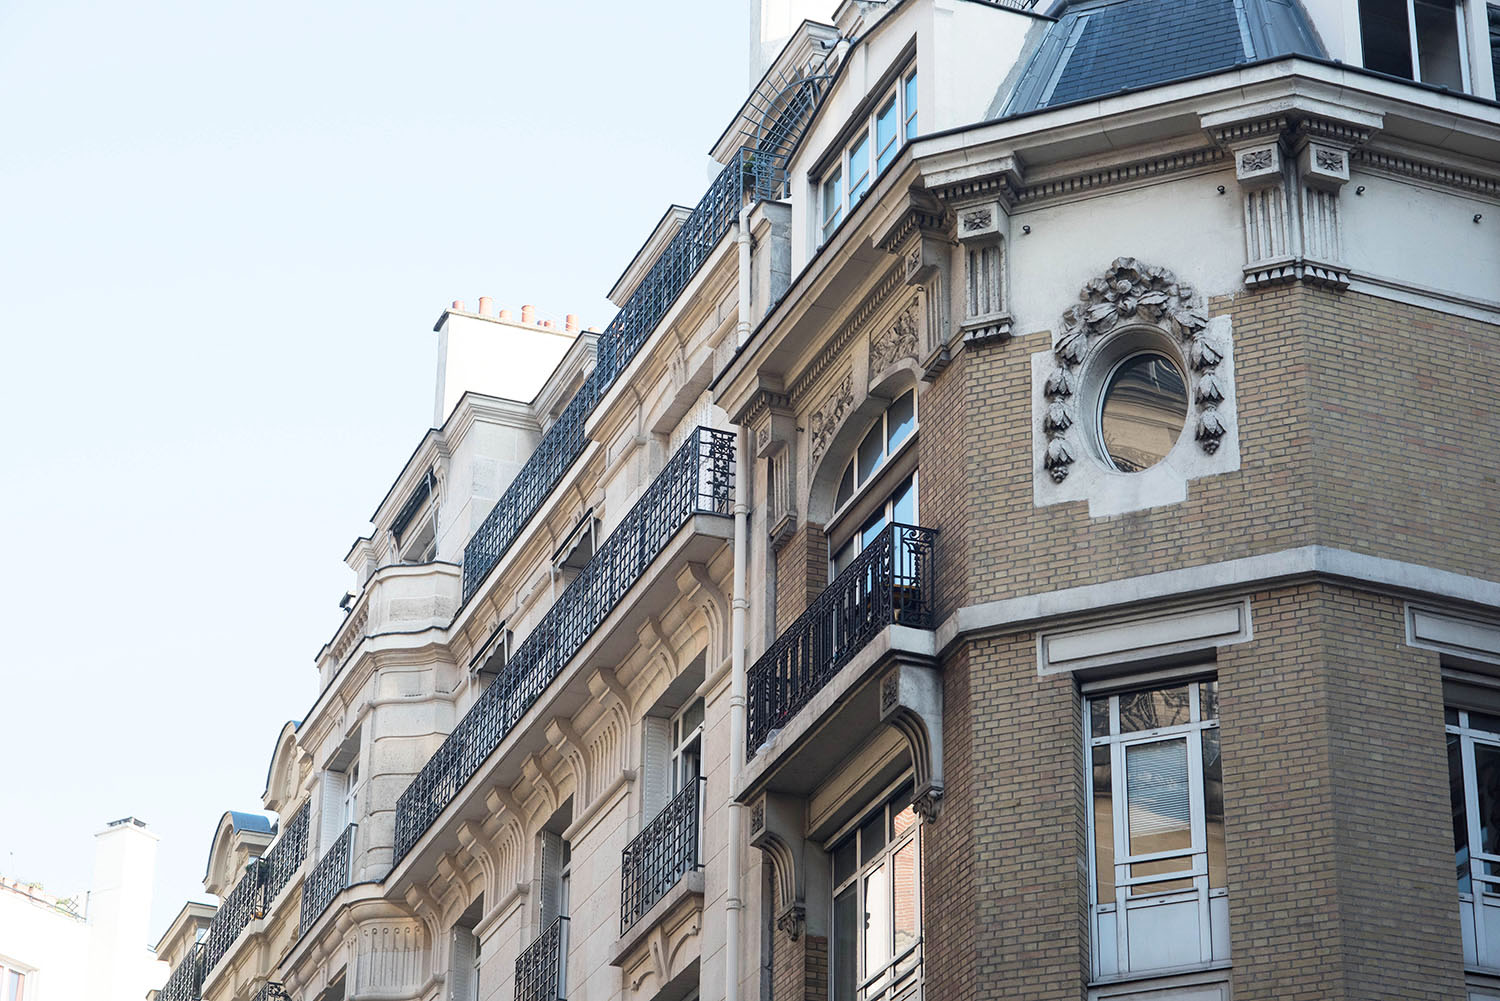 A brown and cream brick building in Paris, as photographed by top Canadian travel blogger Cee Fardoe of Coco & Vera